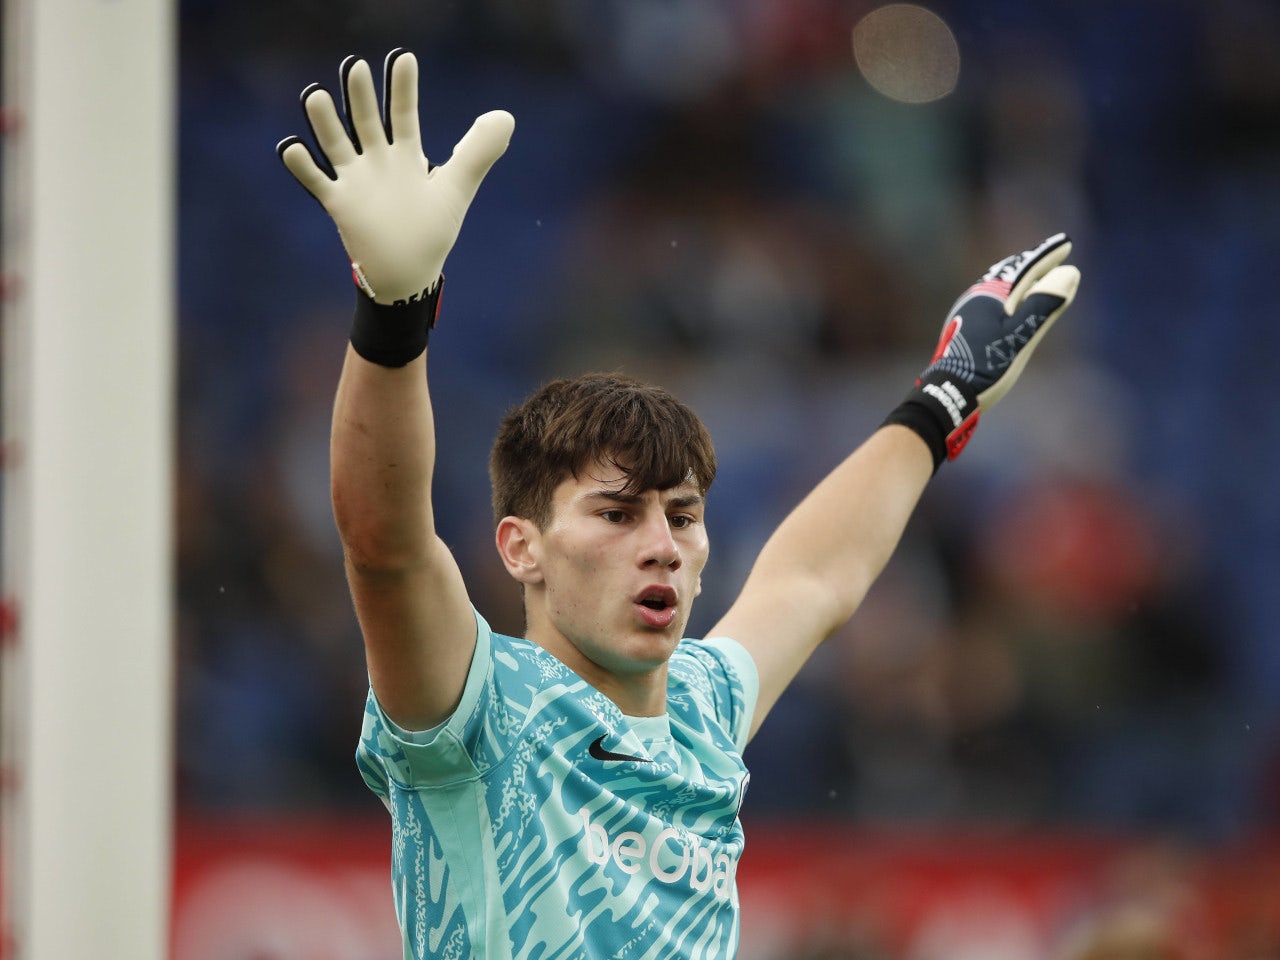 Chelsea transfer news: Blues ready to pay more than €20m for teenage goalkeeper?